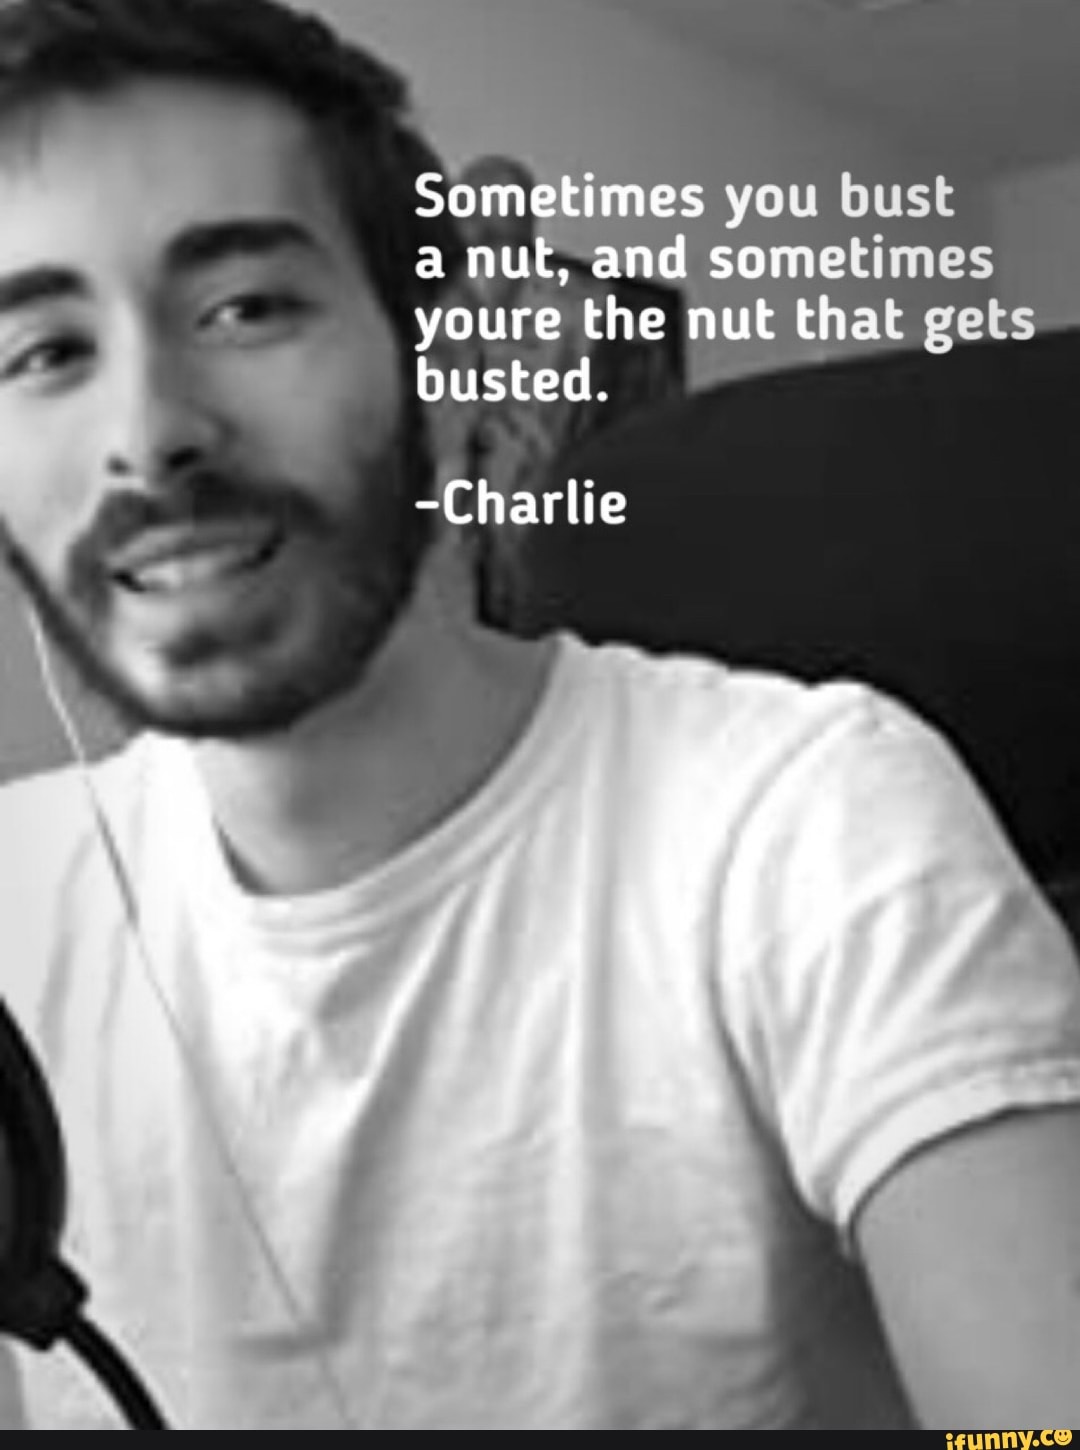 Bust Nut Meme, Remember you can always share any sound with your